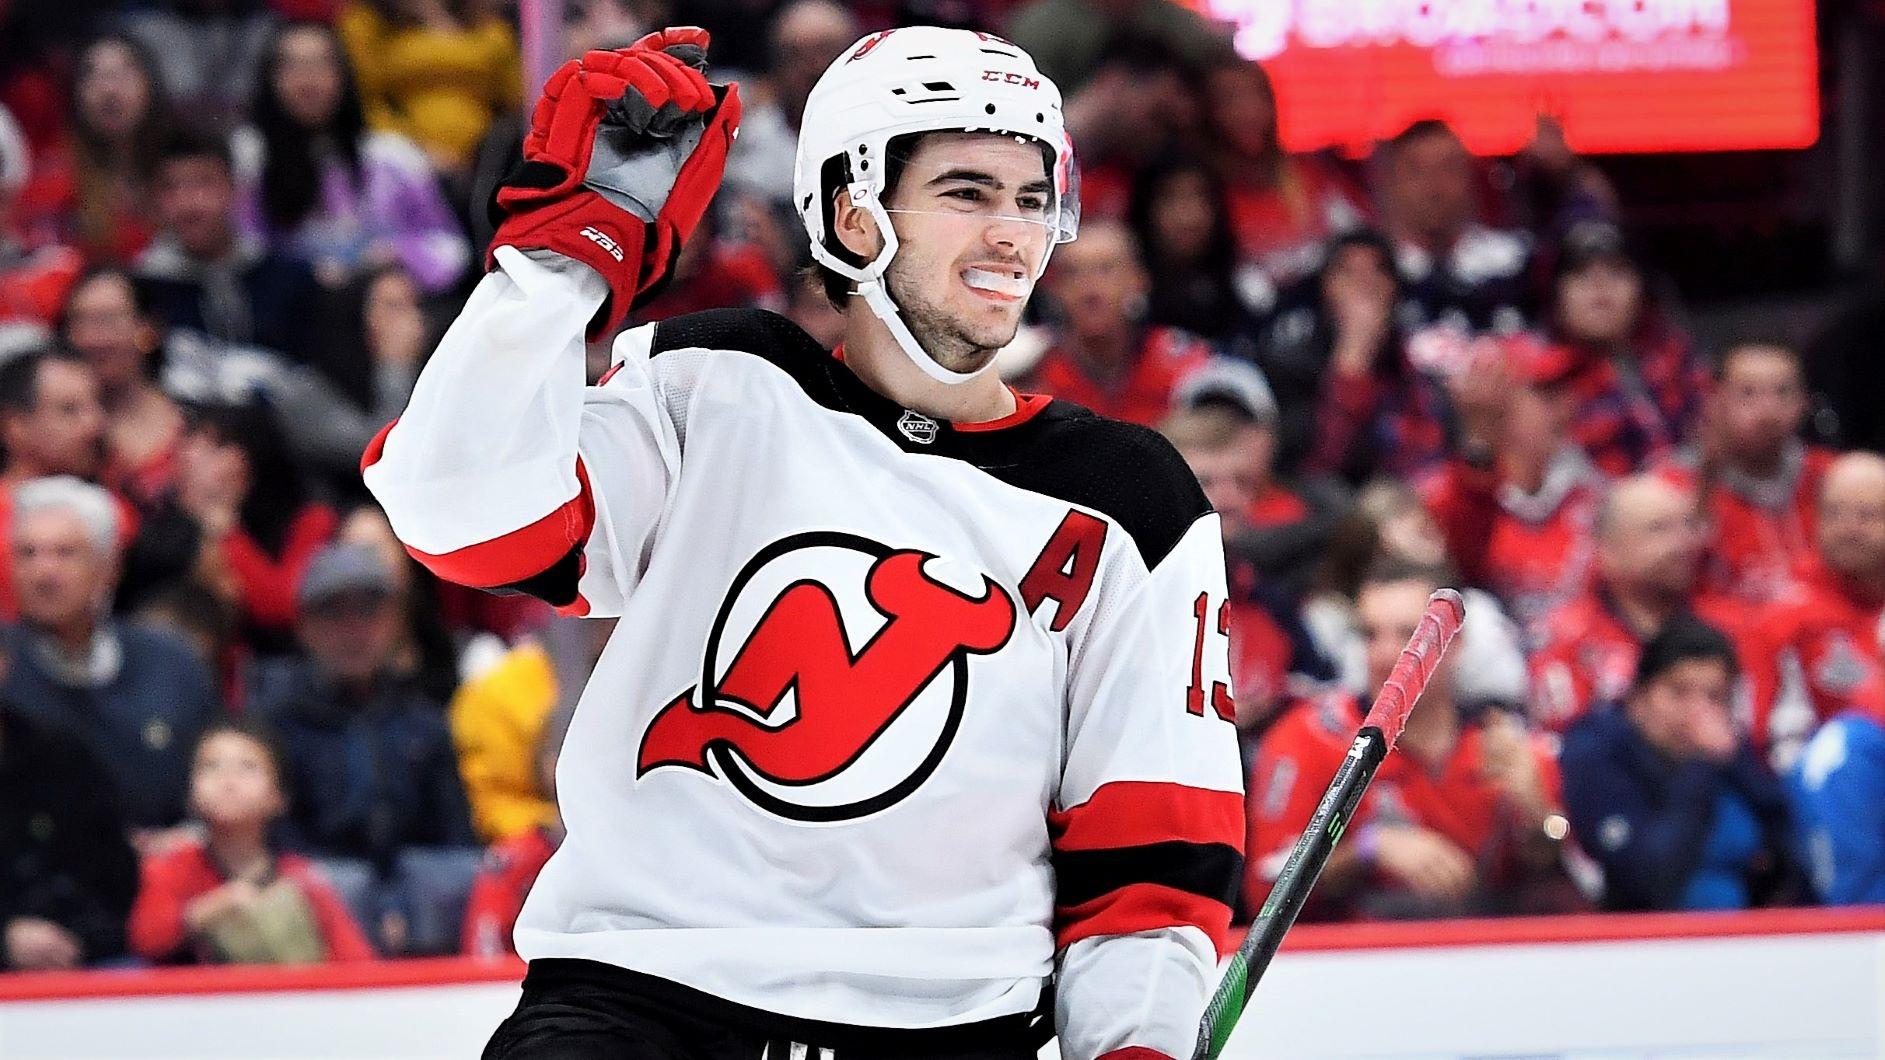 Jan 11, 2020; Washington, District of Columbia, USA; New Jersey Devils center Nico Hischier (13) reacts after scoring a goal against the Washington Capitals during the second period at Capital One Arena. Mandatory Credit: Brad Mills-USA TODAY Sports / © Brad Mills-USA TODAY Sports